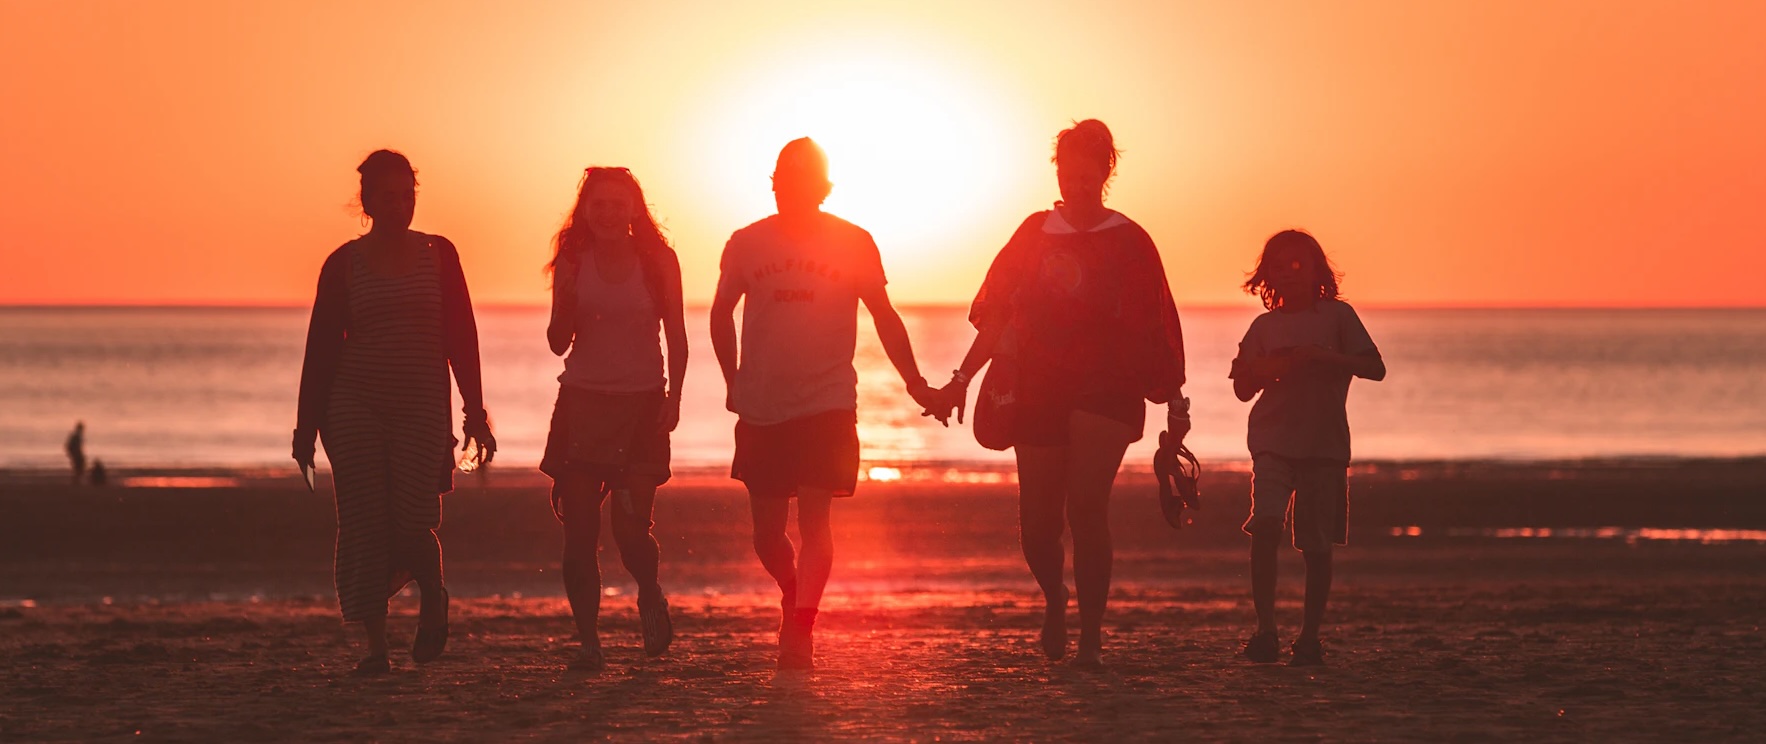 silhouettes of several people walking hand-in-hand in front of a sunset